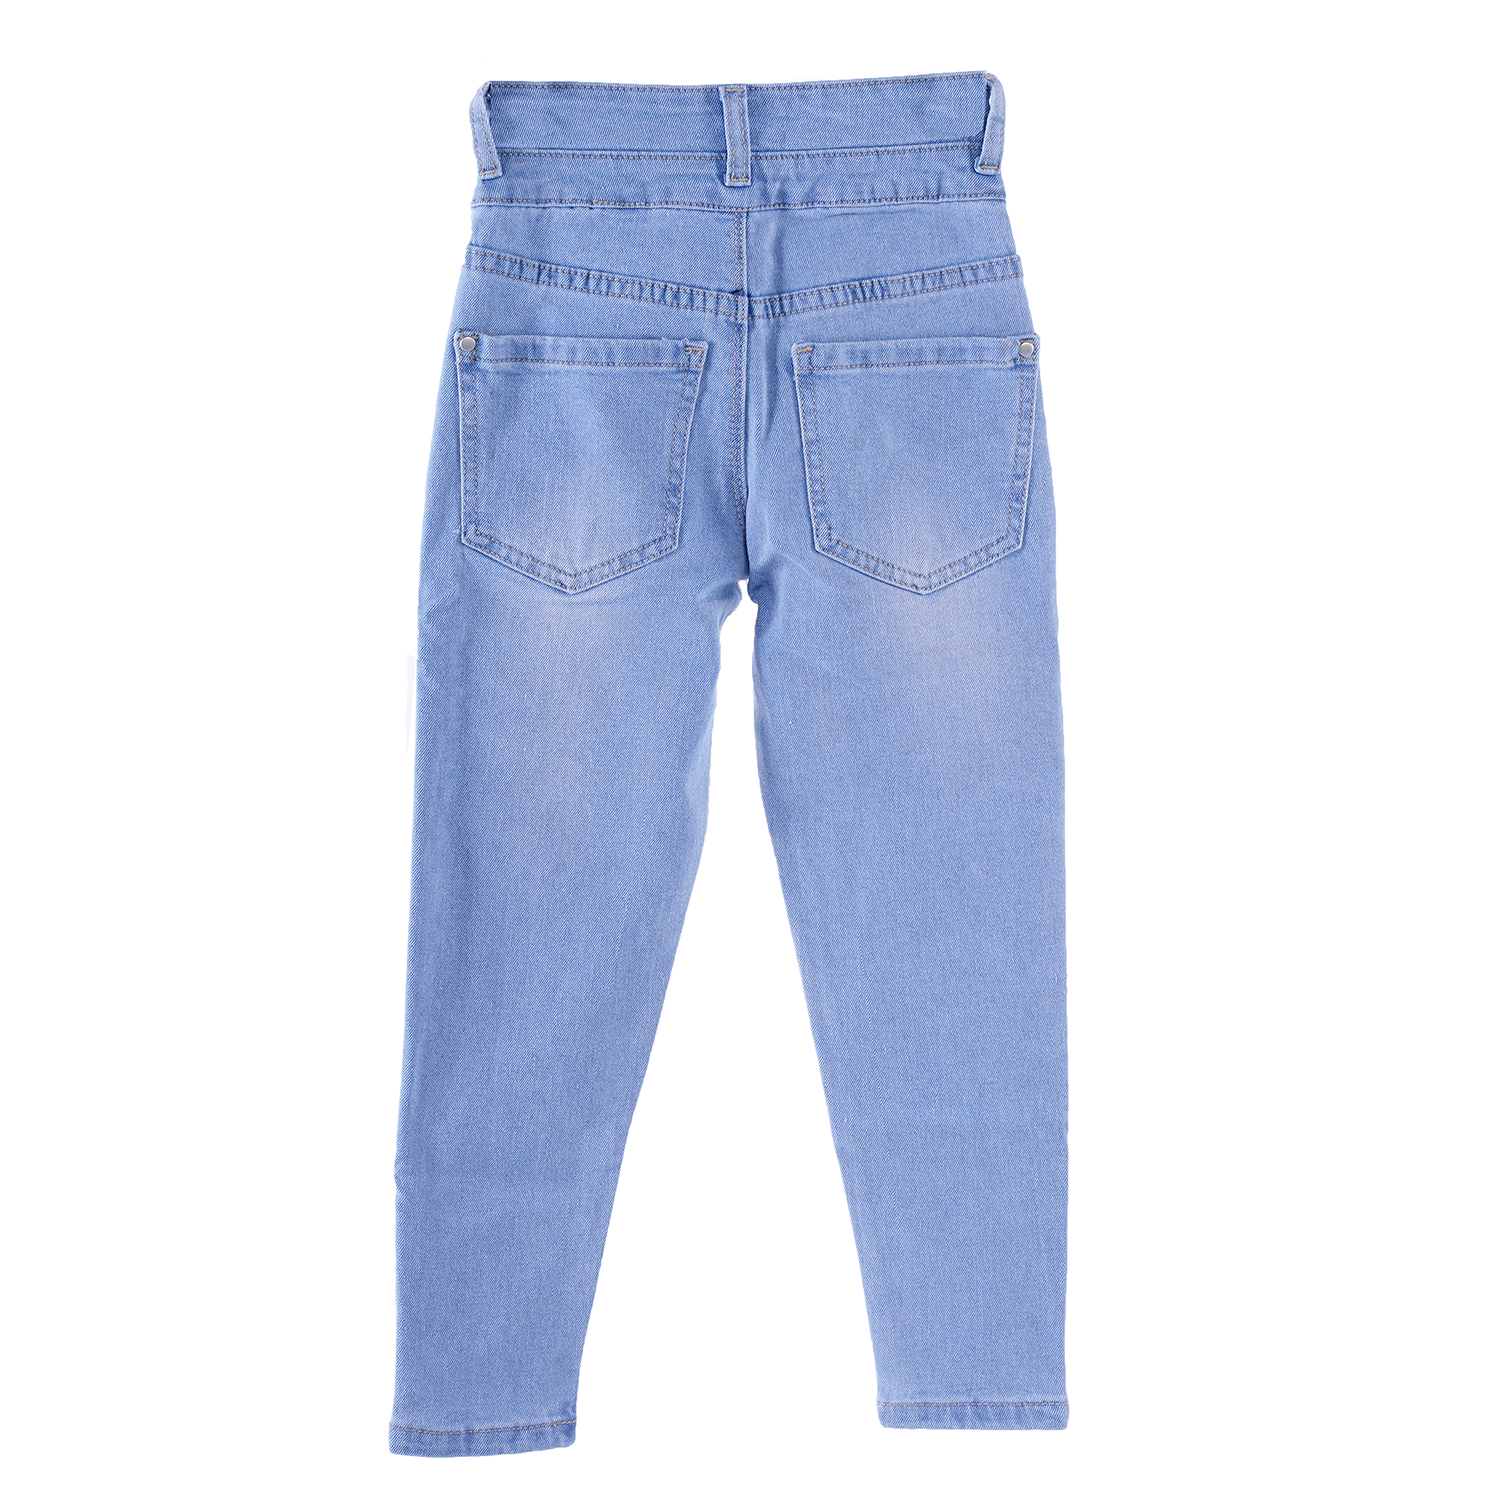 SKYKINGDOM in stock low price Kids Girls Jeans High Quality Denim Washed Boutique Cute jeans for Girl